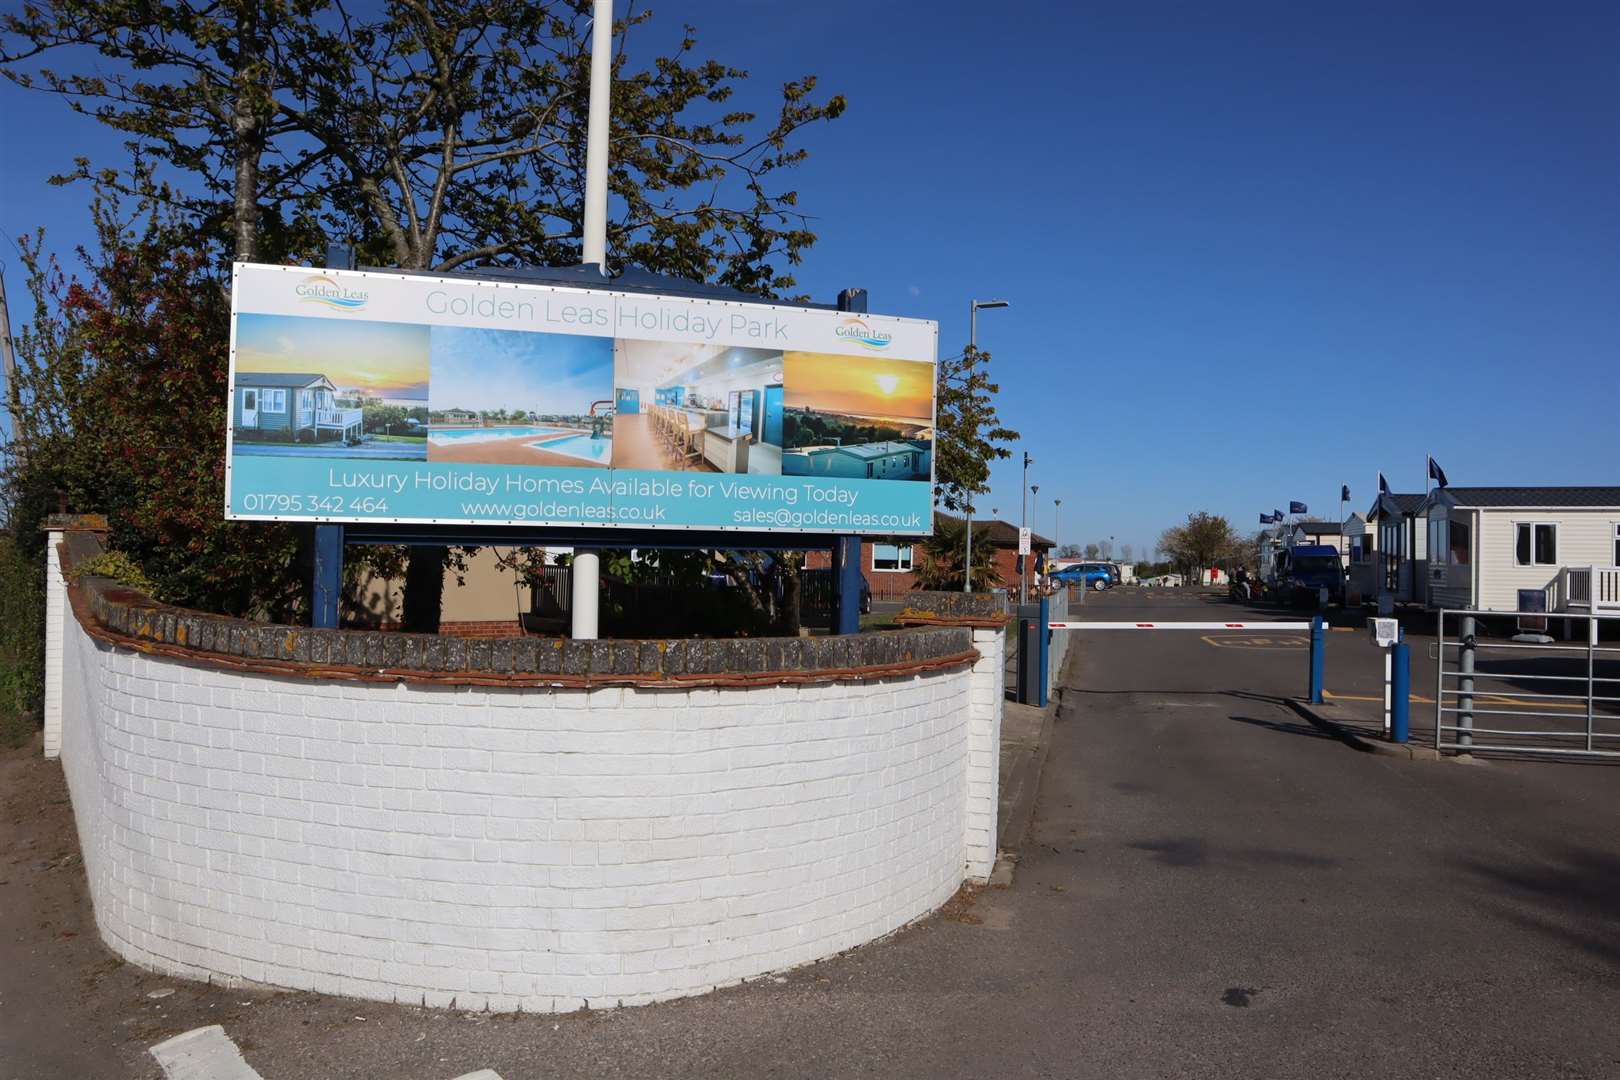 Existing entrance to Golden Leas holiday park, Minster, Sheppey